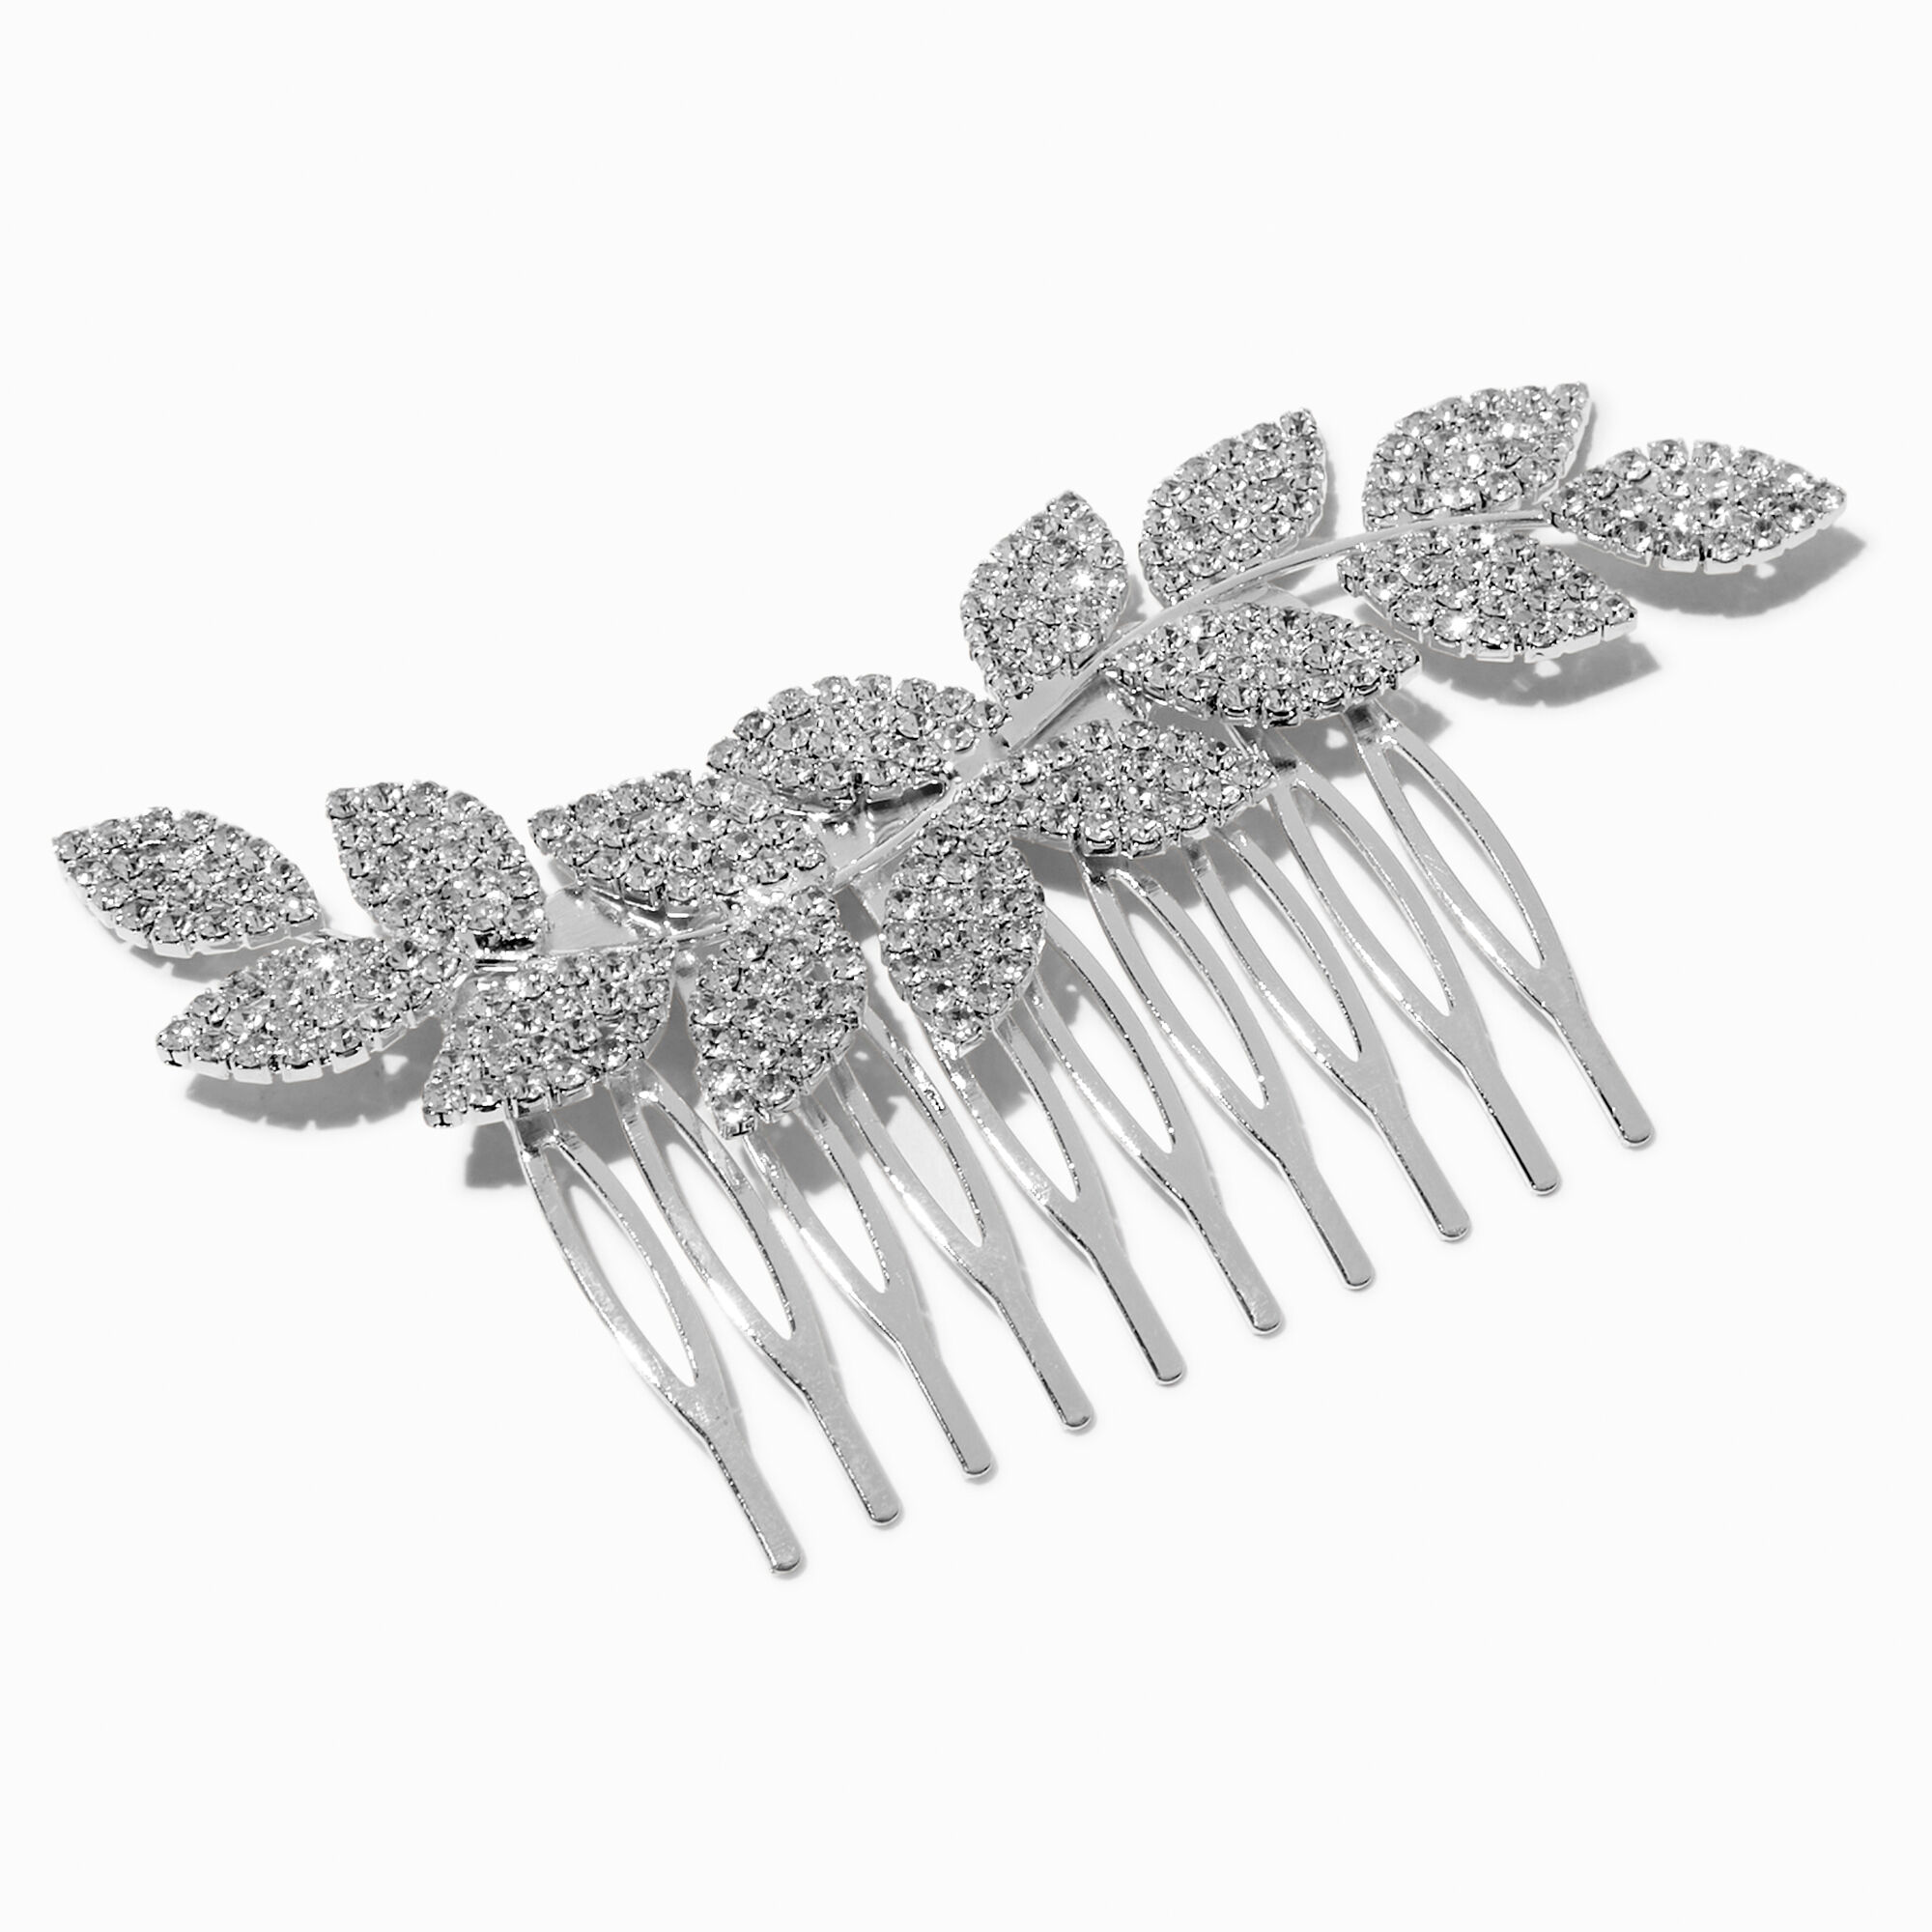 View Claires Tone Pave Rhinestone Leaf Hair Comb Silver information